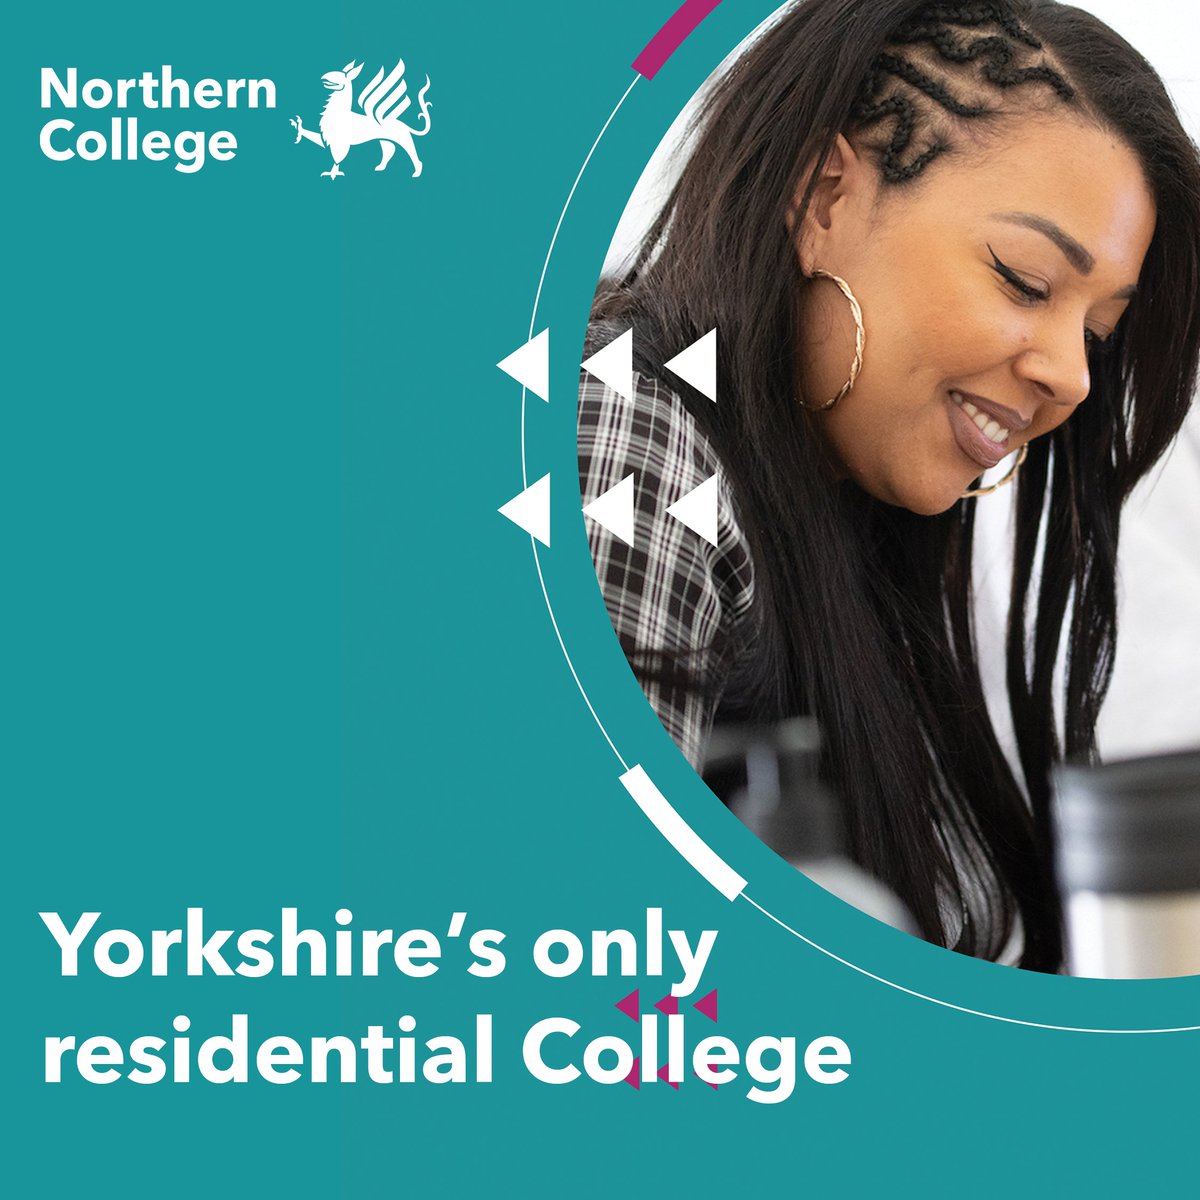 Ready for change?

Our range of new part time courses for adults are the perfect starting point.

Apply now
northern.ac.uk/courses-a-z/